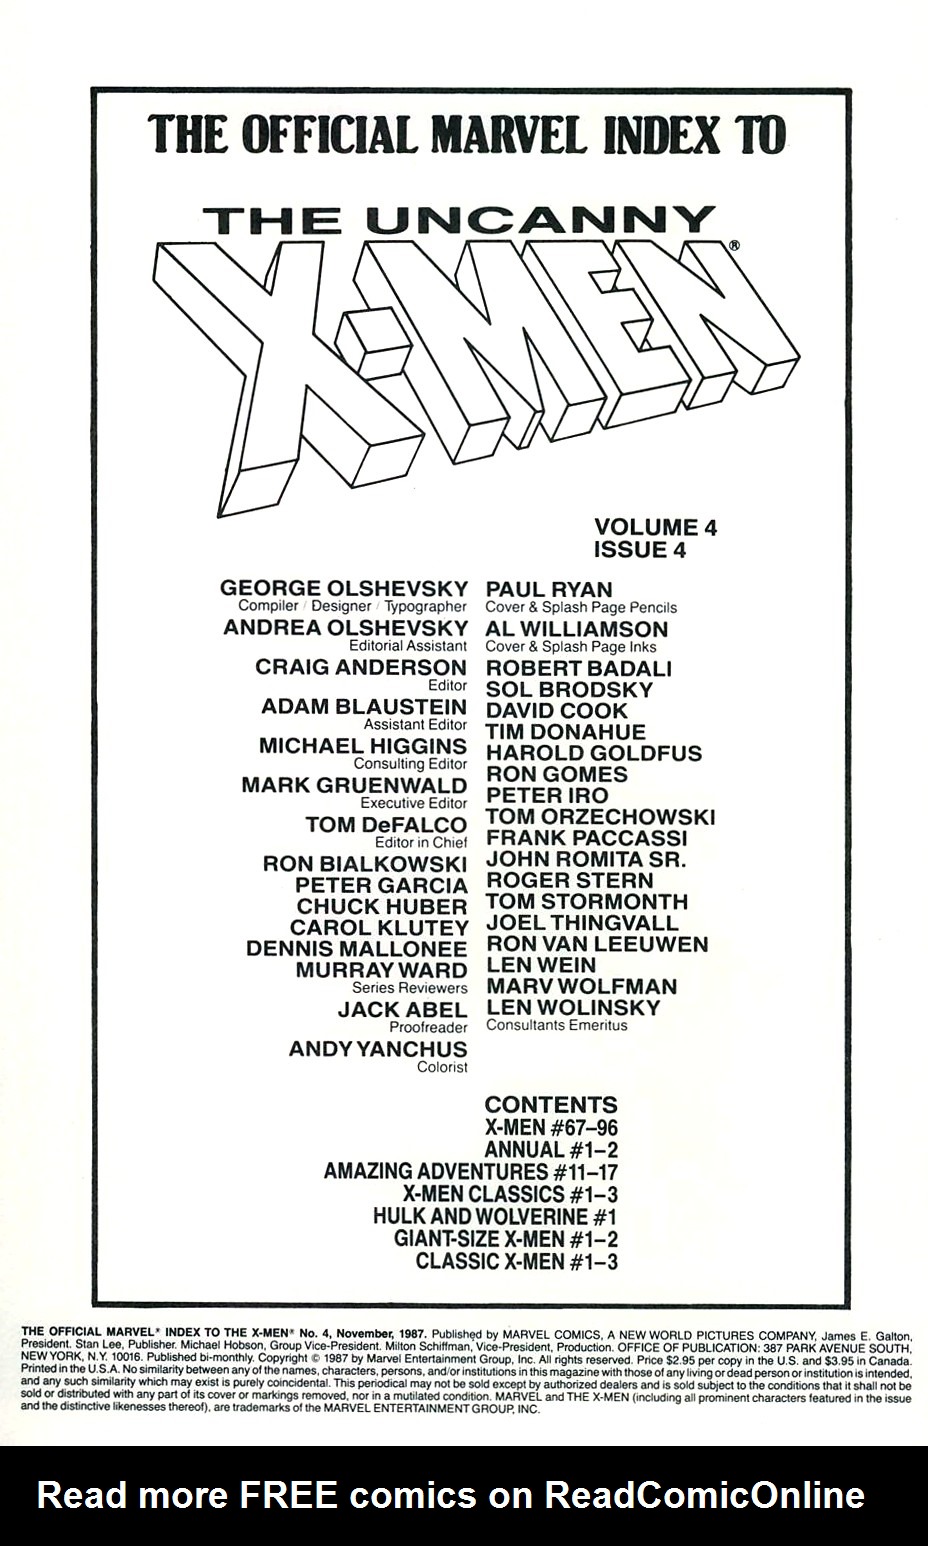 Read online The Official Marvel Index To The X-Men comic -  Issue #4 - 2